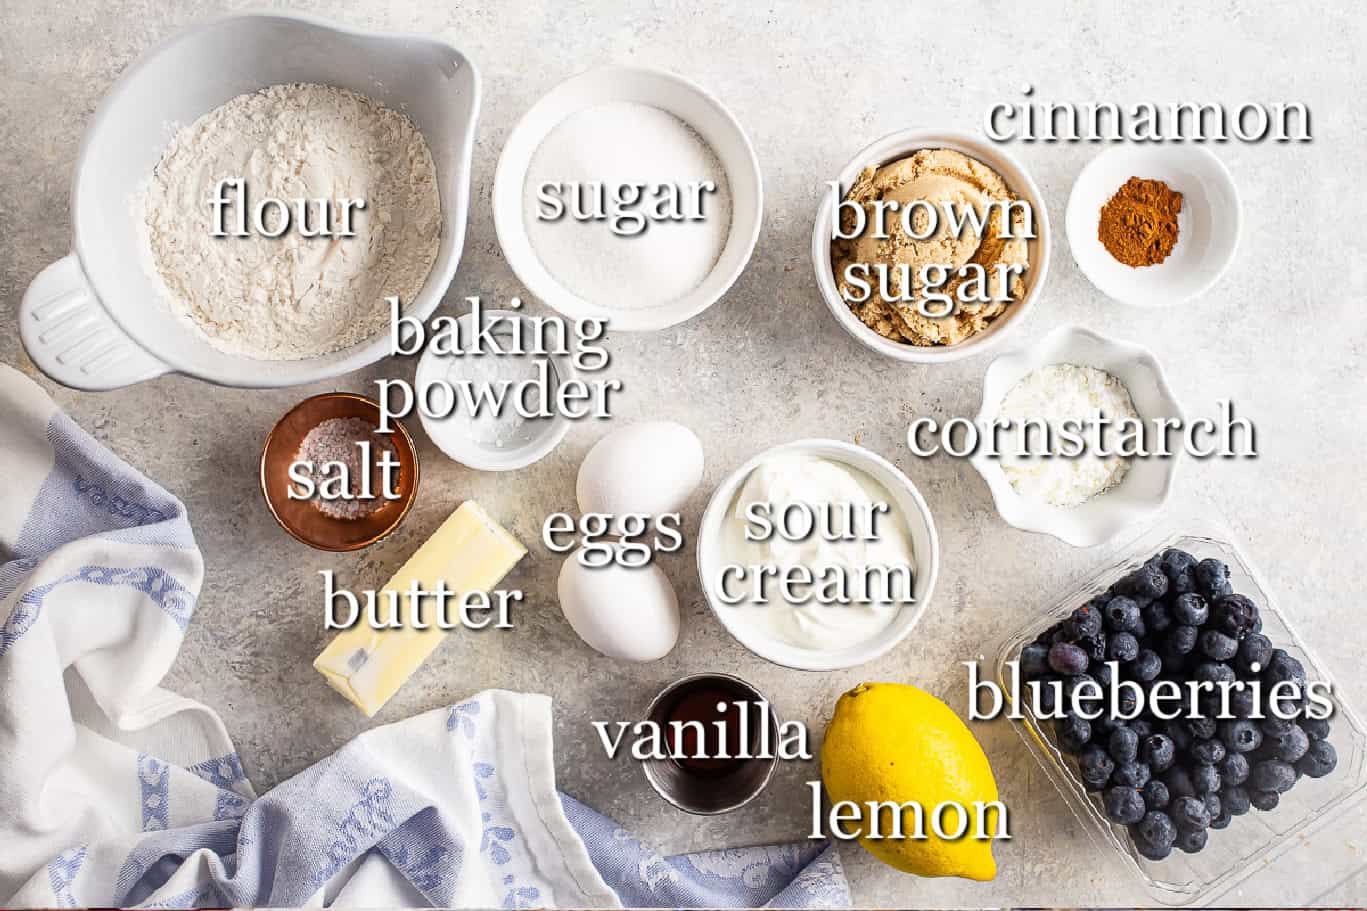 Ingredients for making blueberry buckle, with text labels.